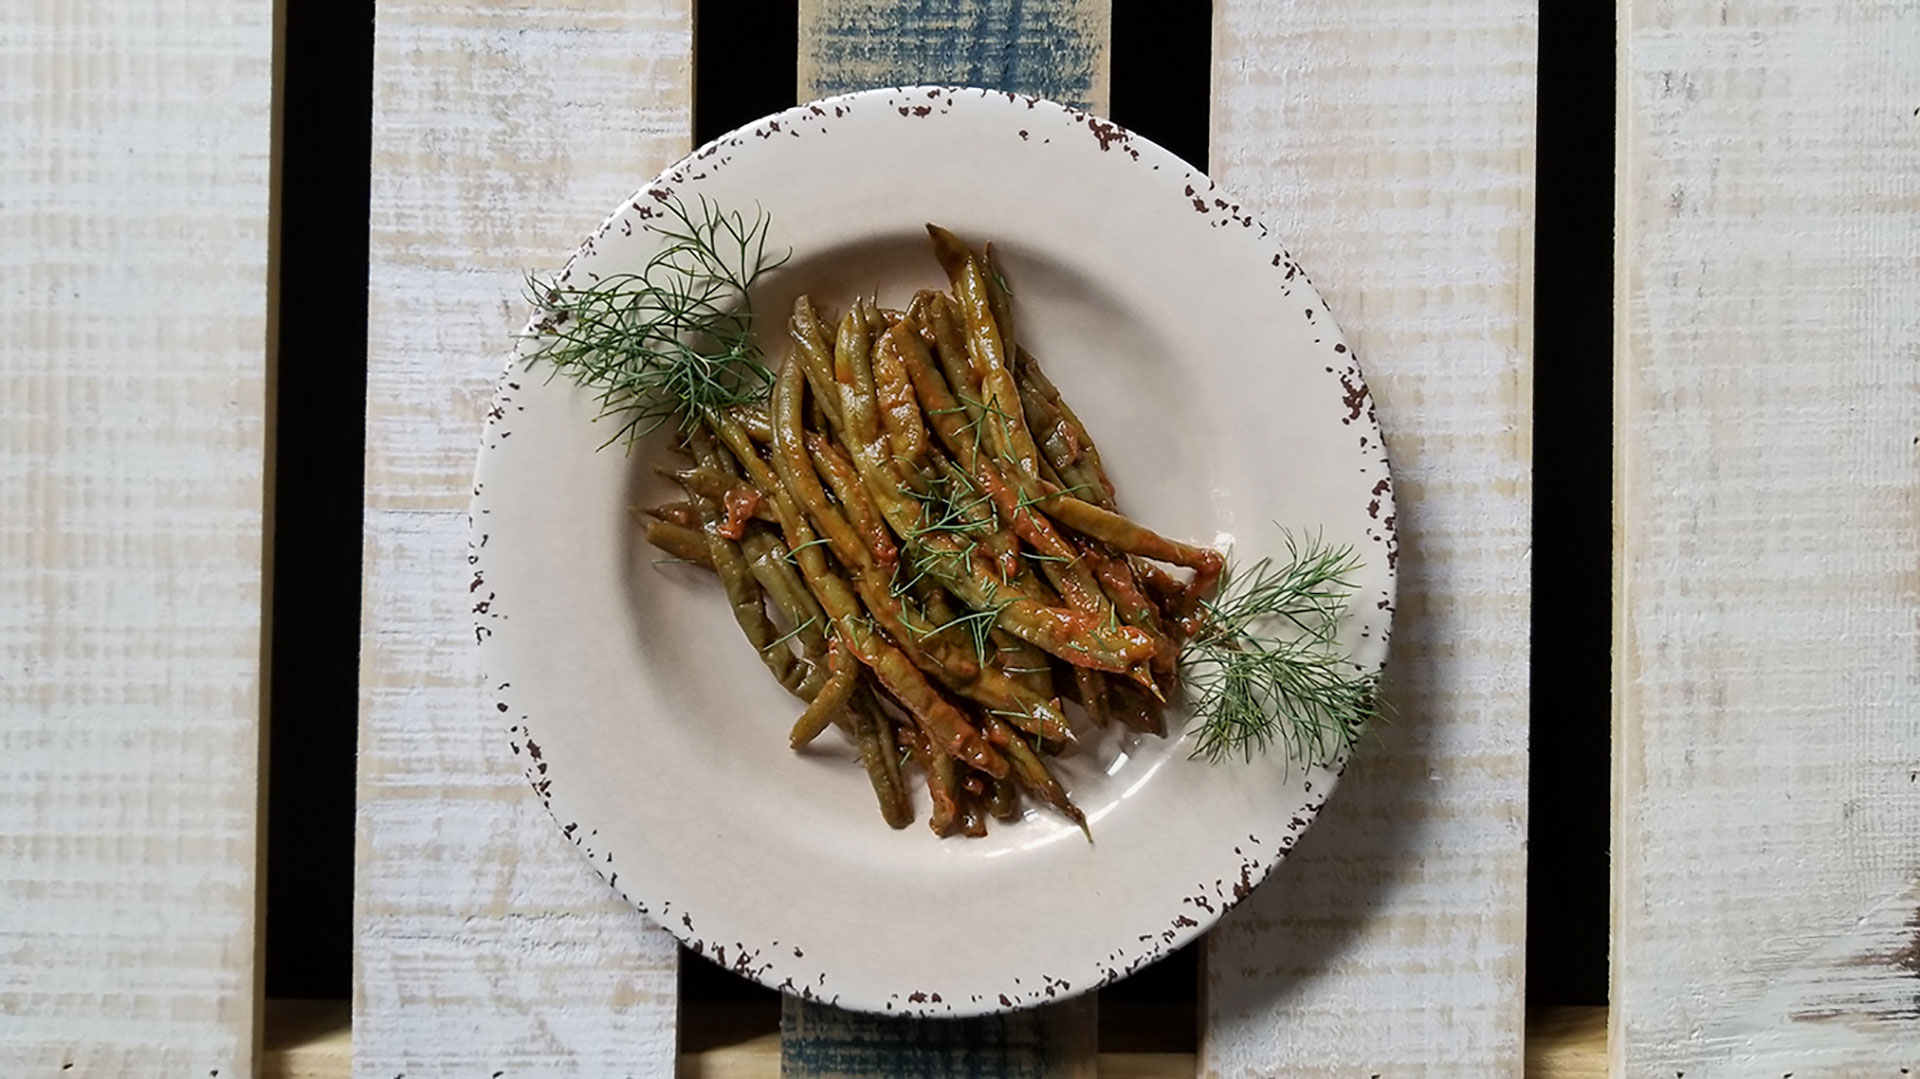 Greek Green Beans in Tomato Sauce n a bowl with dill